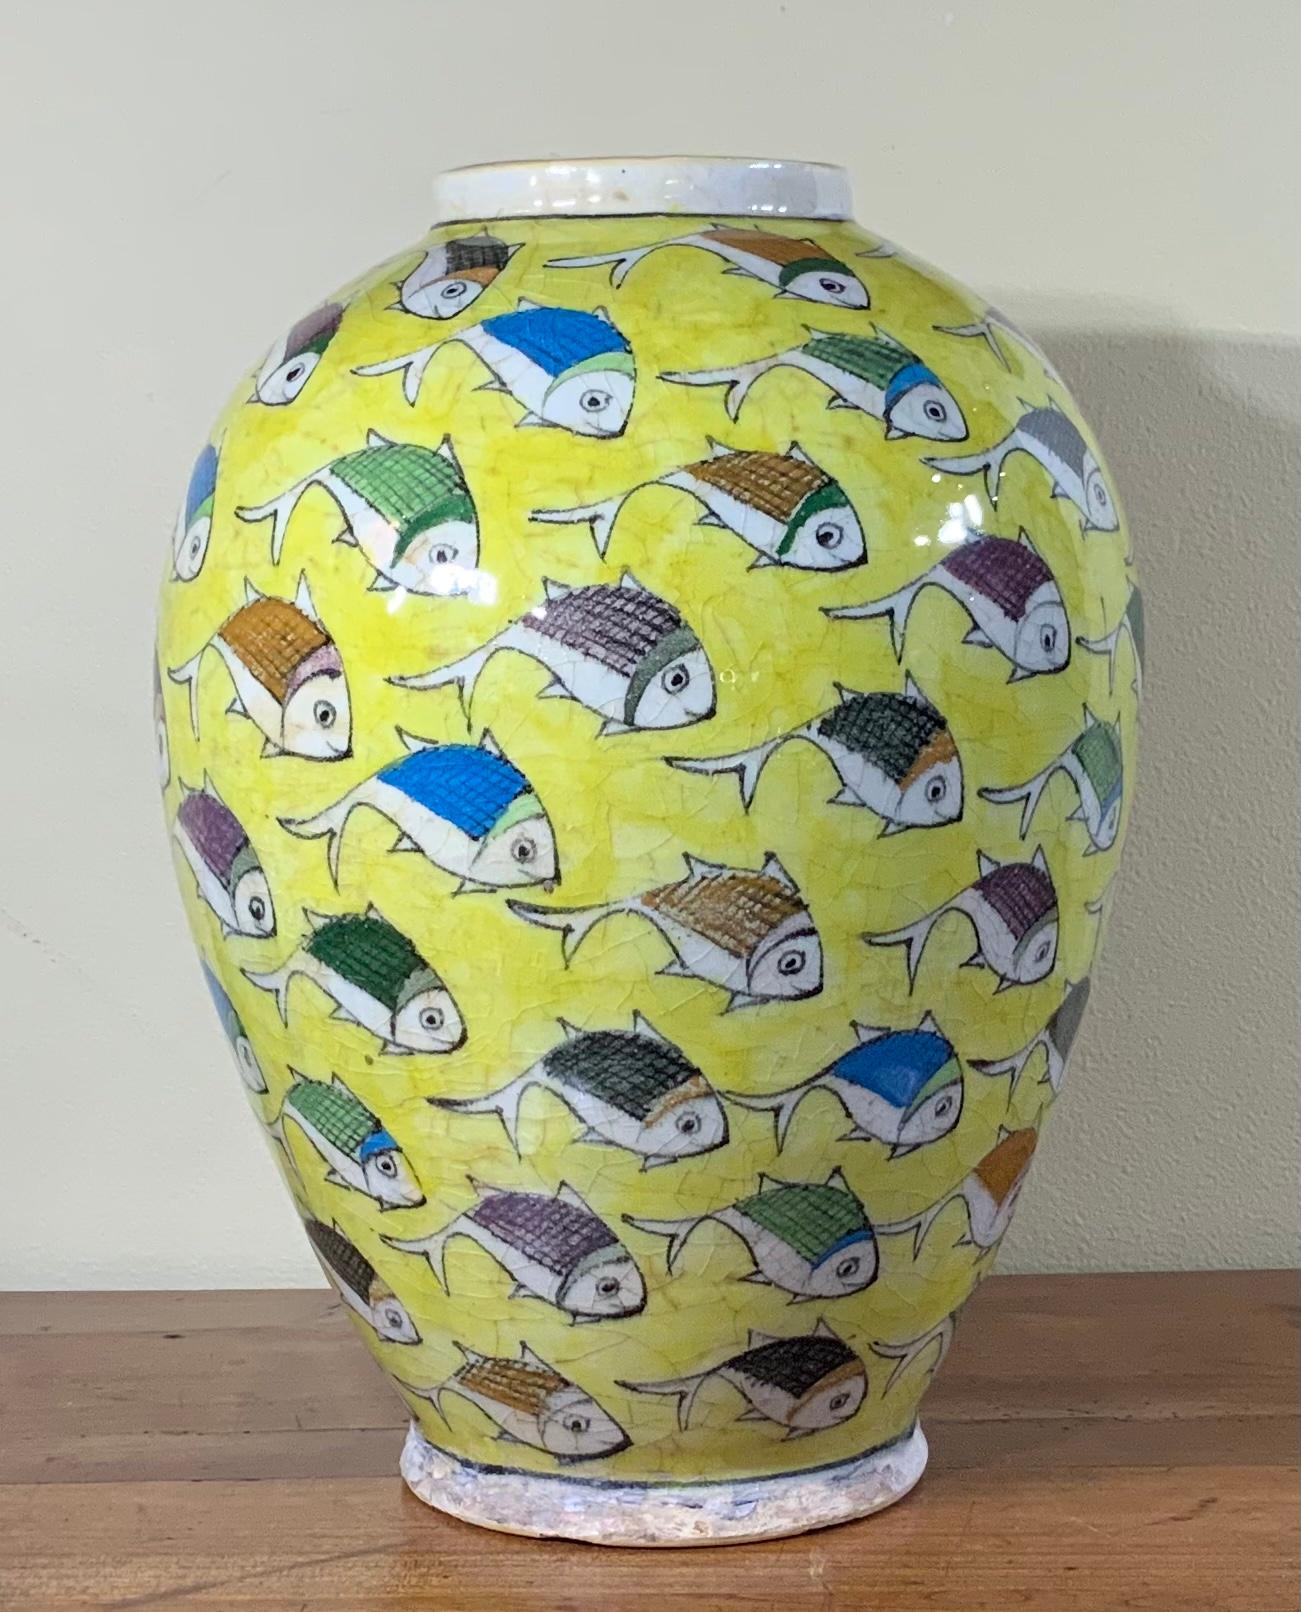 Beautiful yellow ceramic vase hand-painted and glazed with colorful fish motif surrounding on yellow background. Great object of art for display.